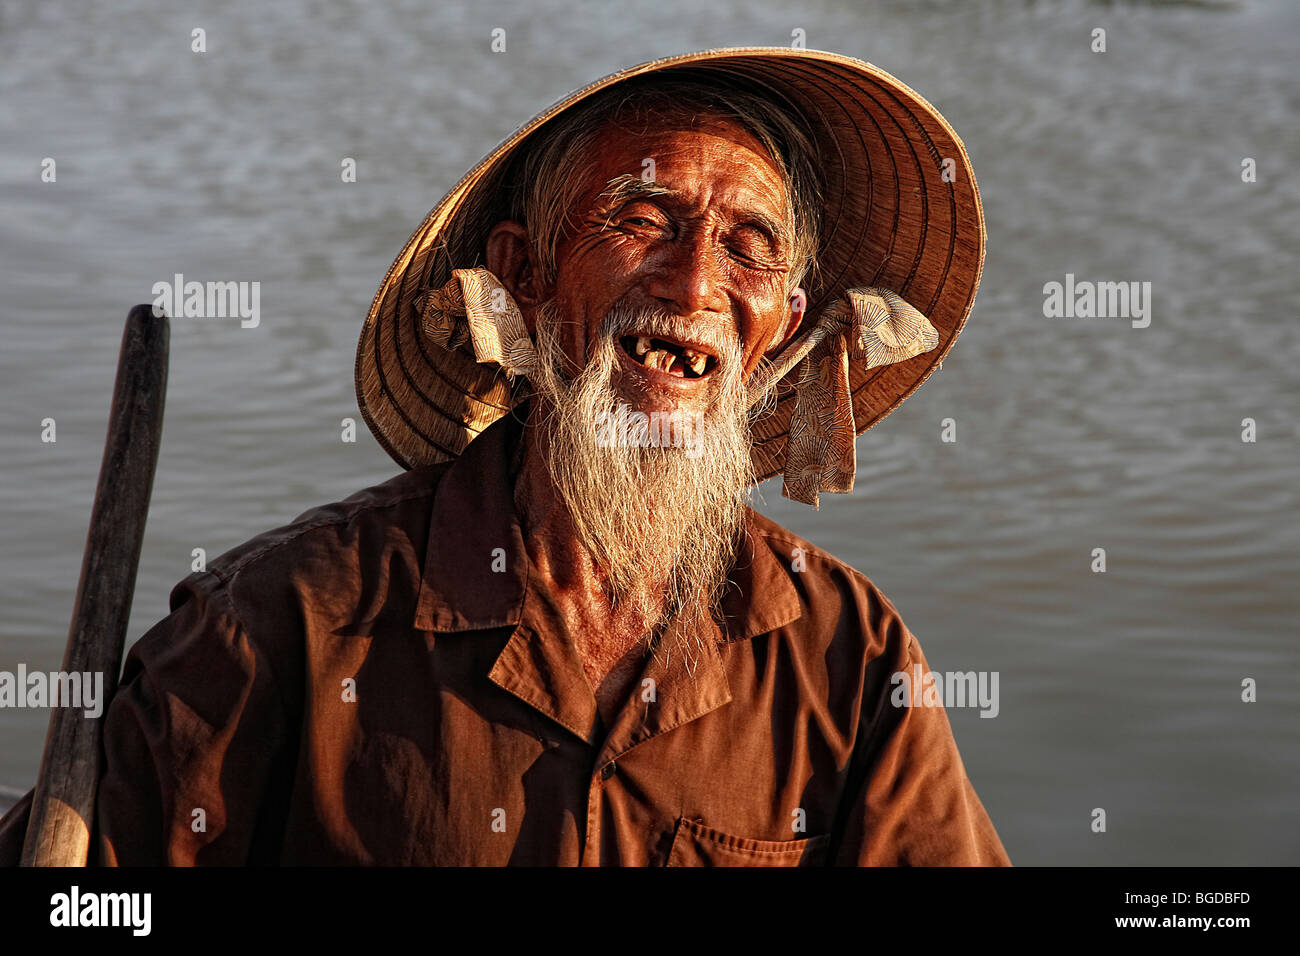 Elderly, smiling fisherman in his boat in the port of Hoi An, Vietnam, Southeast Asia Stock Photo